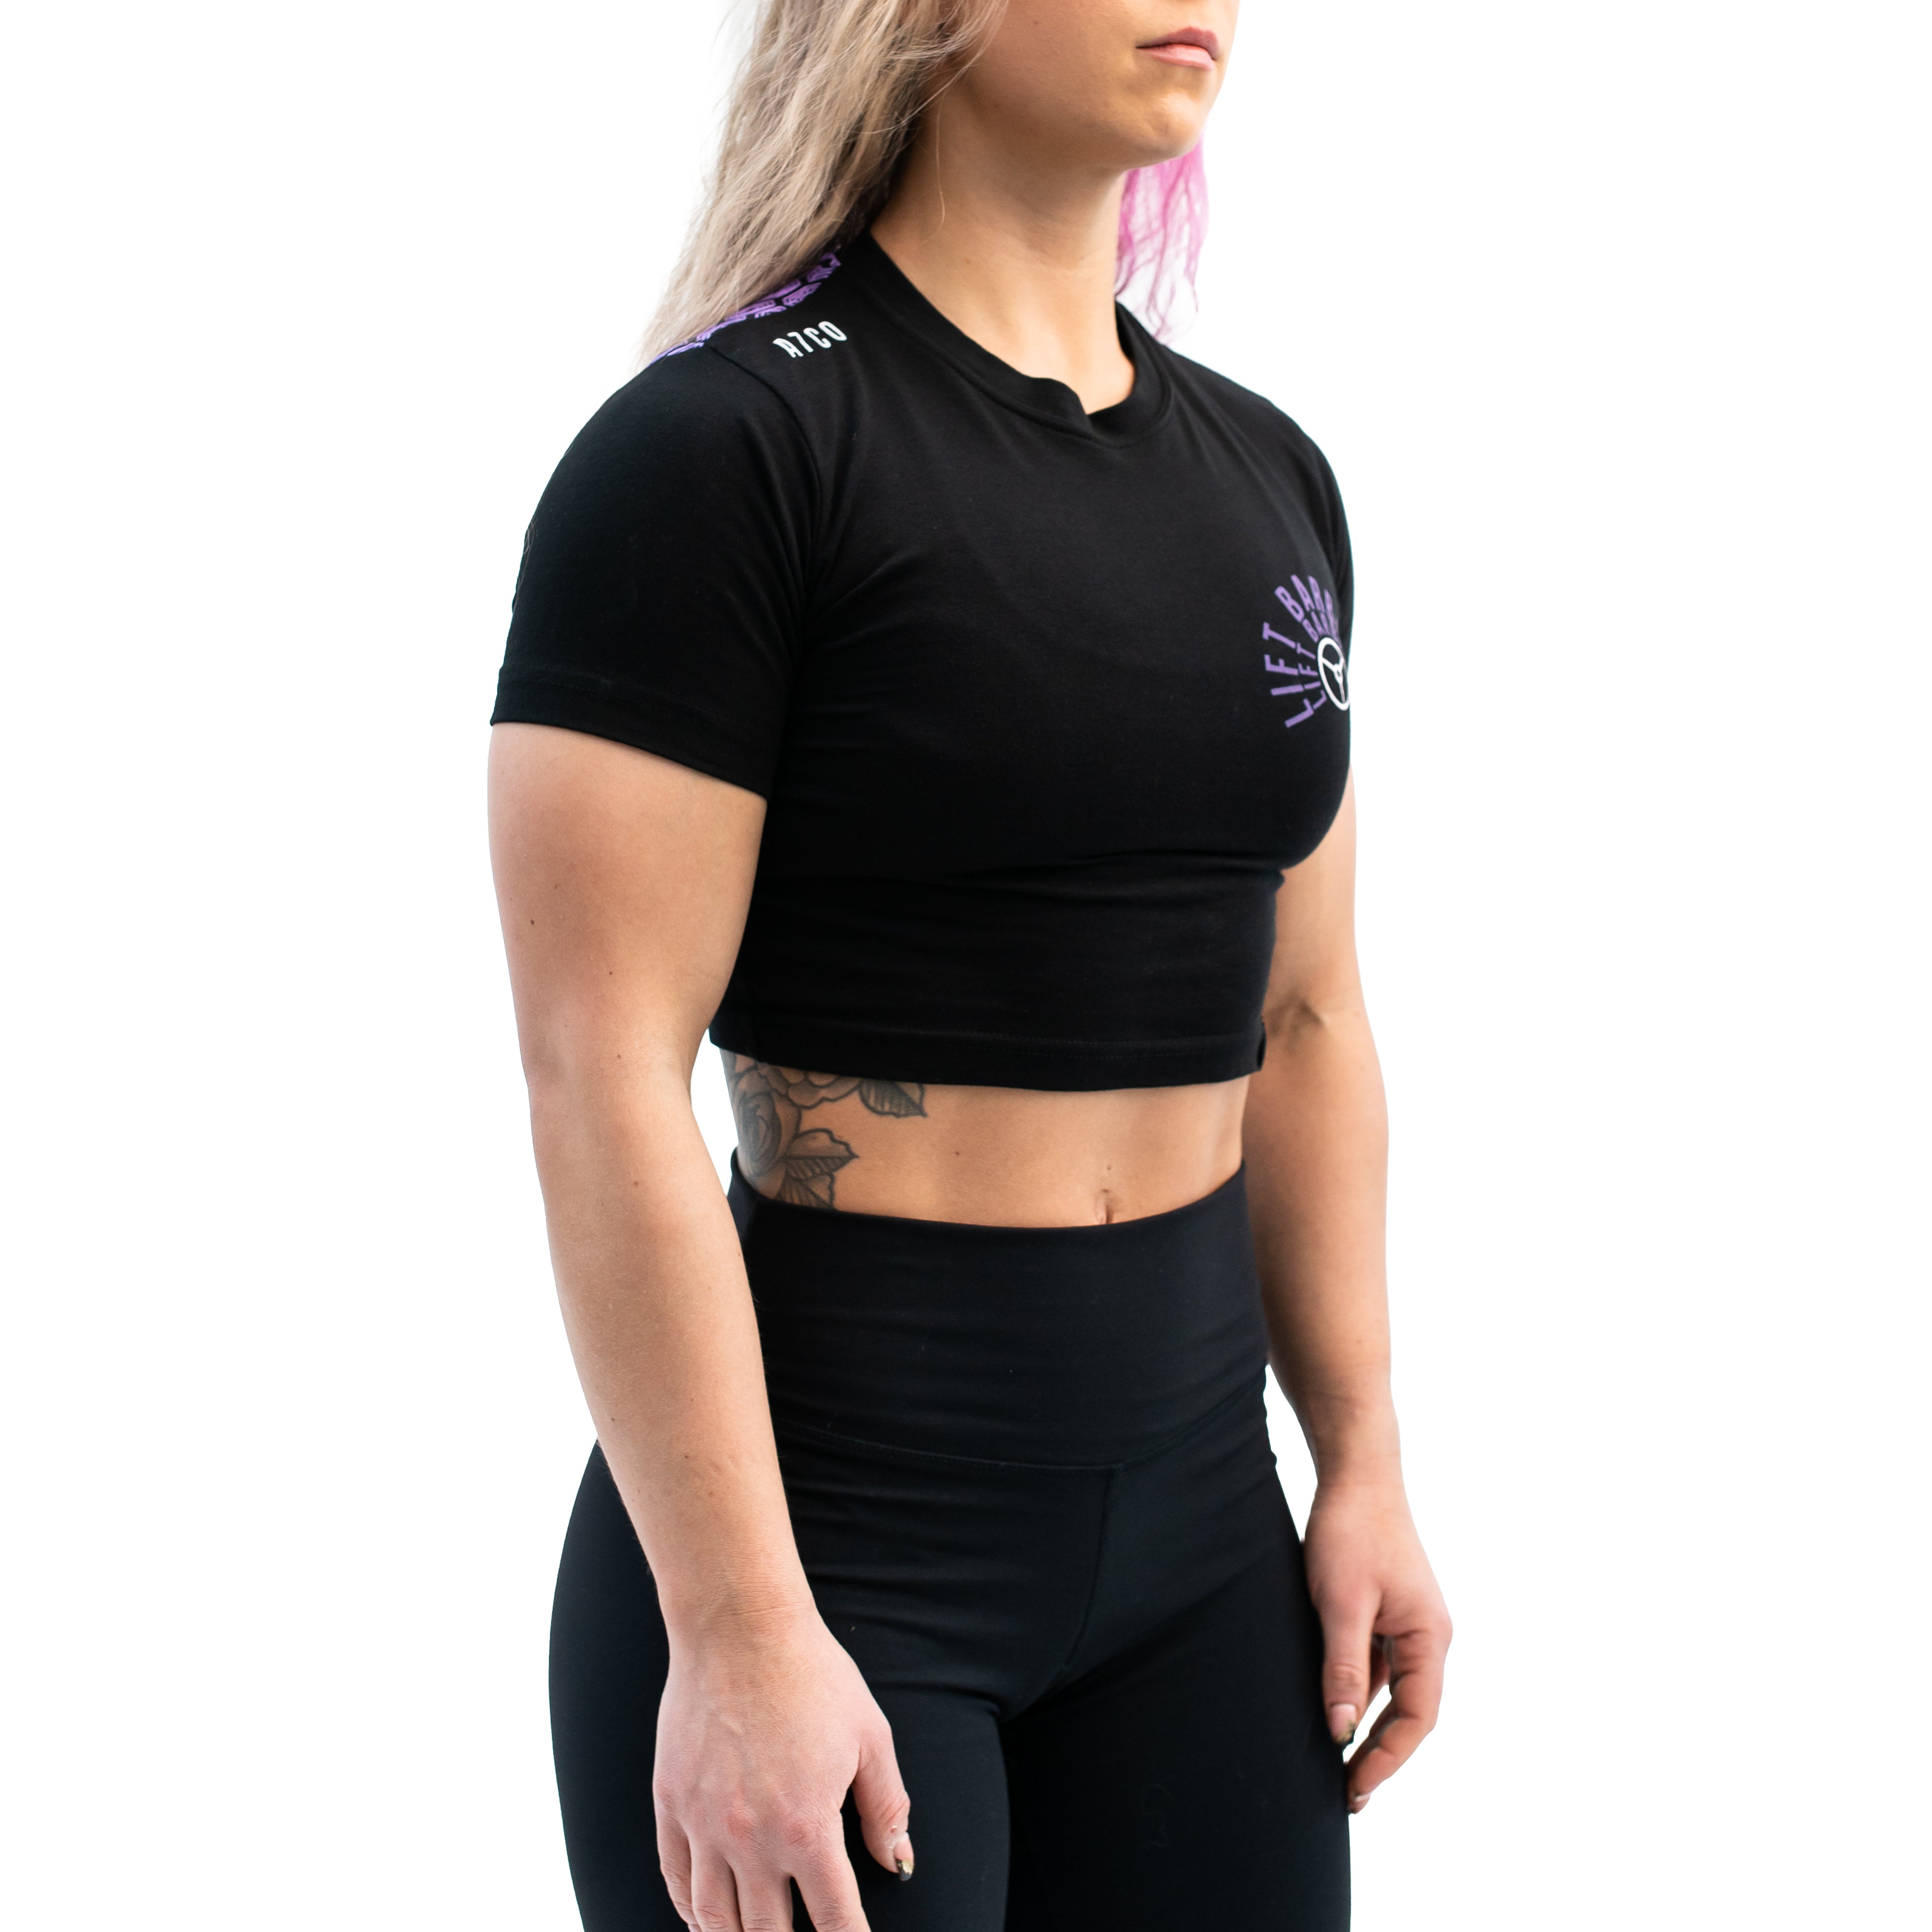 Lilac Dream Bar Grip T-shirt, great as a squat shirt. Purchase Lilac Dream Bar Grip Shirt from A7 UK. Purchase Lilac Dream Bar Grip Shirt Europe from A7 Europe. No more chalk and no more sliding. Best Bar Grip T shirts, shipping to UK and Europe from A7 UK. Lilac Dream Bar Grip Shirt includes. A7UK has the best Powerlifting apparel for all your workouts. Available in UK and Europe including France, Italy, Germany, the Netherlands, Sweden and Poland.